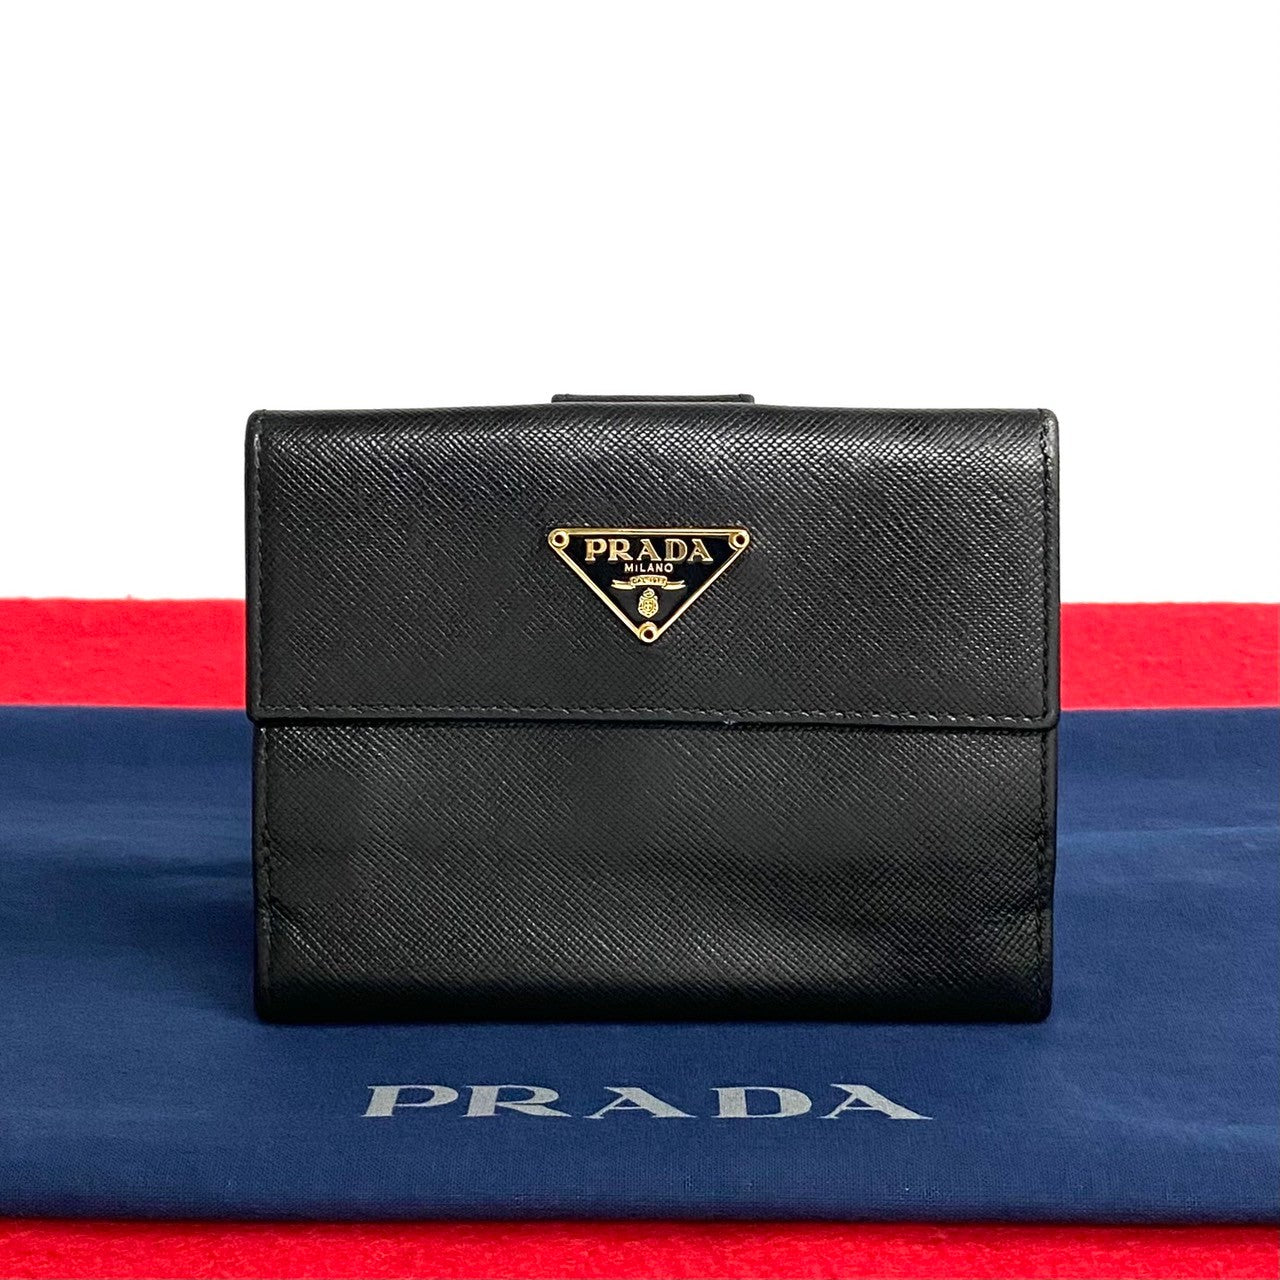 Prada Saffiano Leather Bifold Wallet Leather Short Wallet in Good condition